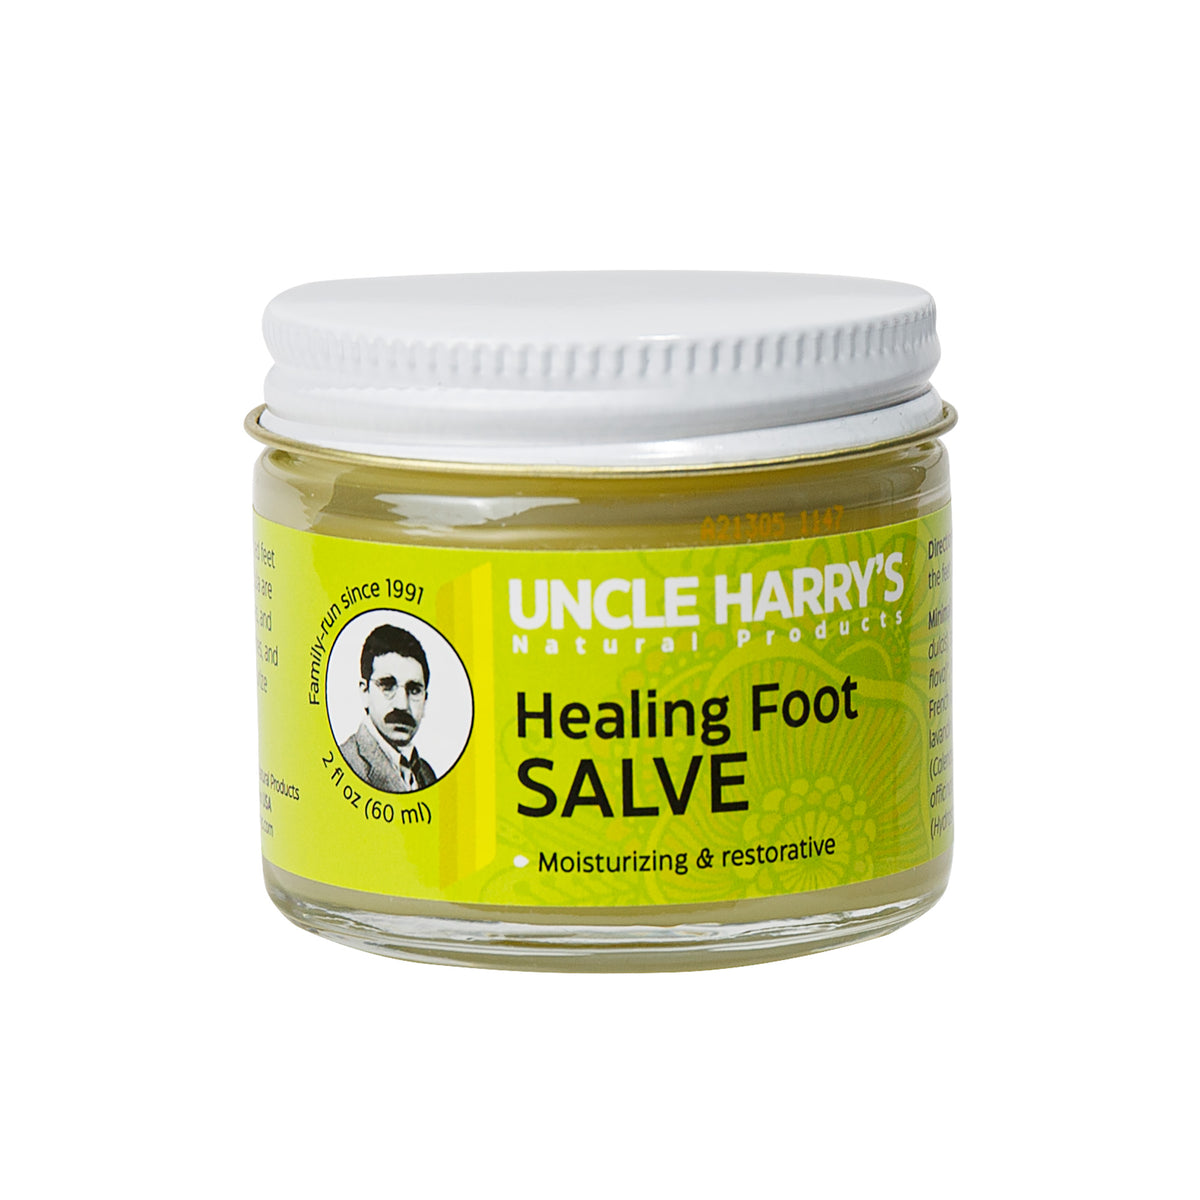 Primary image of Healing Foot Salve for Cracks